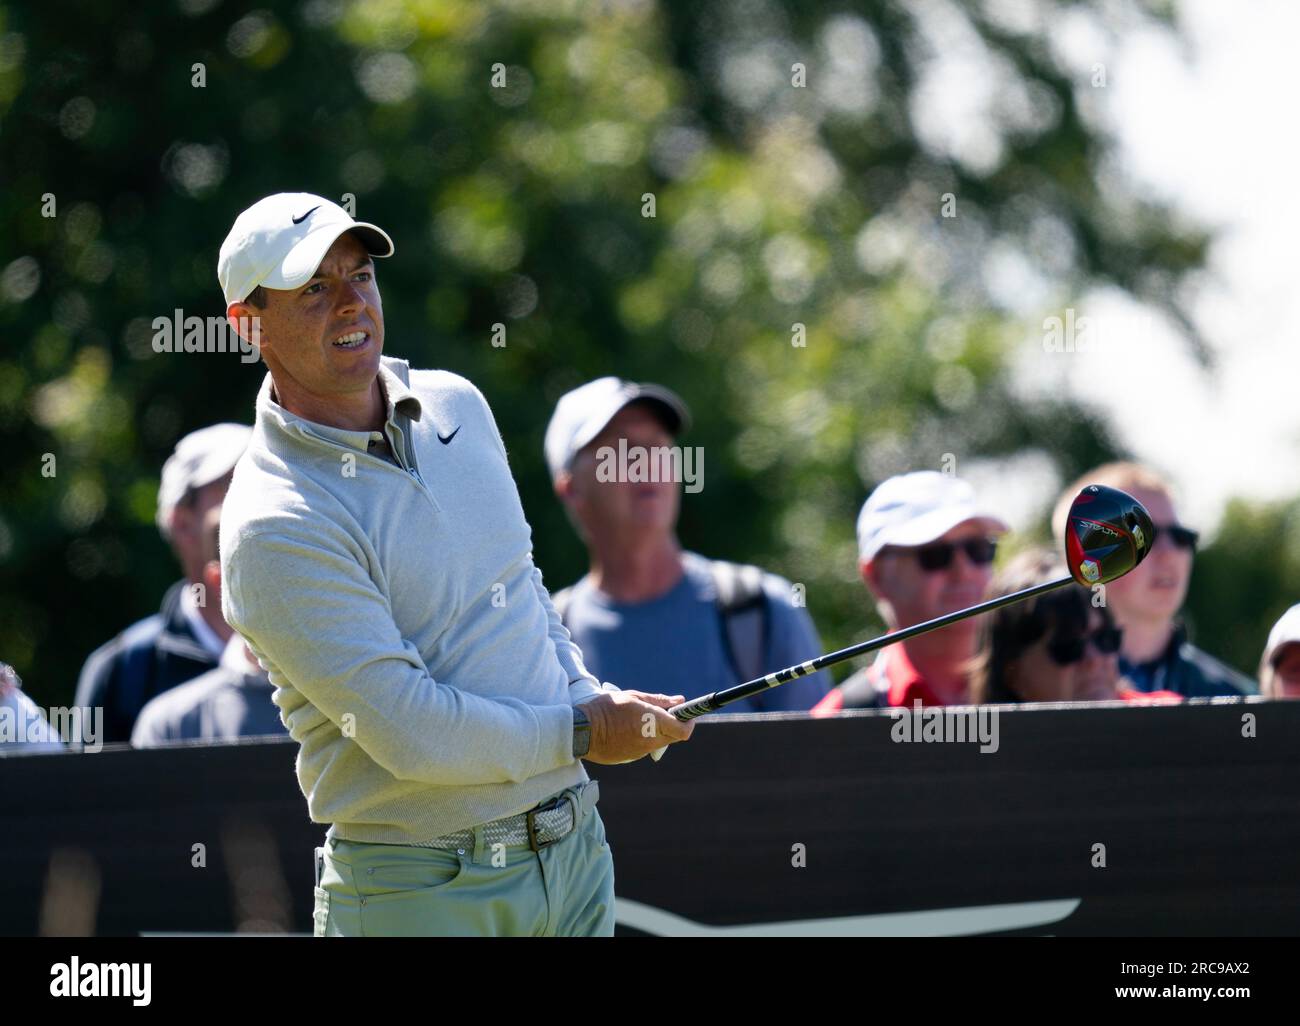 North Berwick, East Lothian, Scotland, UK. 13th July 2023. Rory McElroy tees off on 4th hole at the Genesis Scottish Open at the Renaissance Club in North Berwick.  Iain Masterton/Alamy Live News Stock Photo